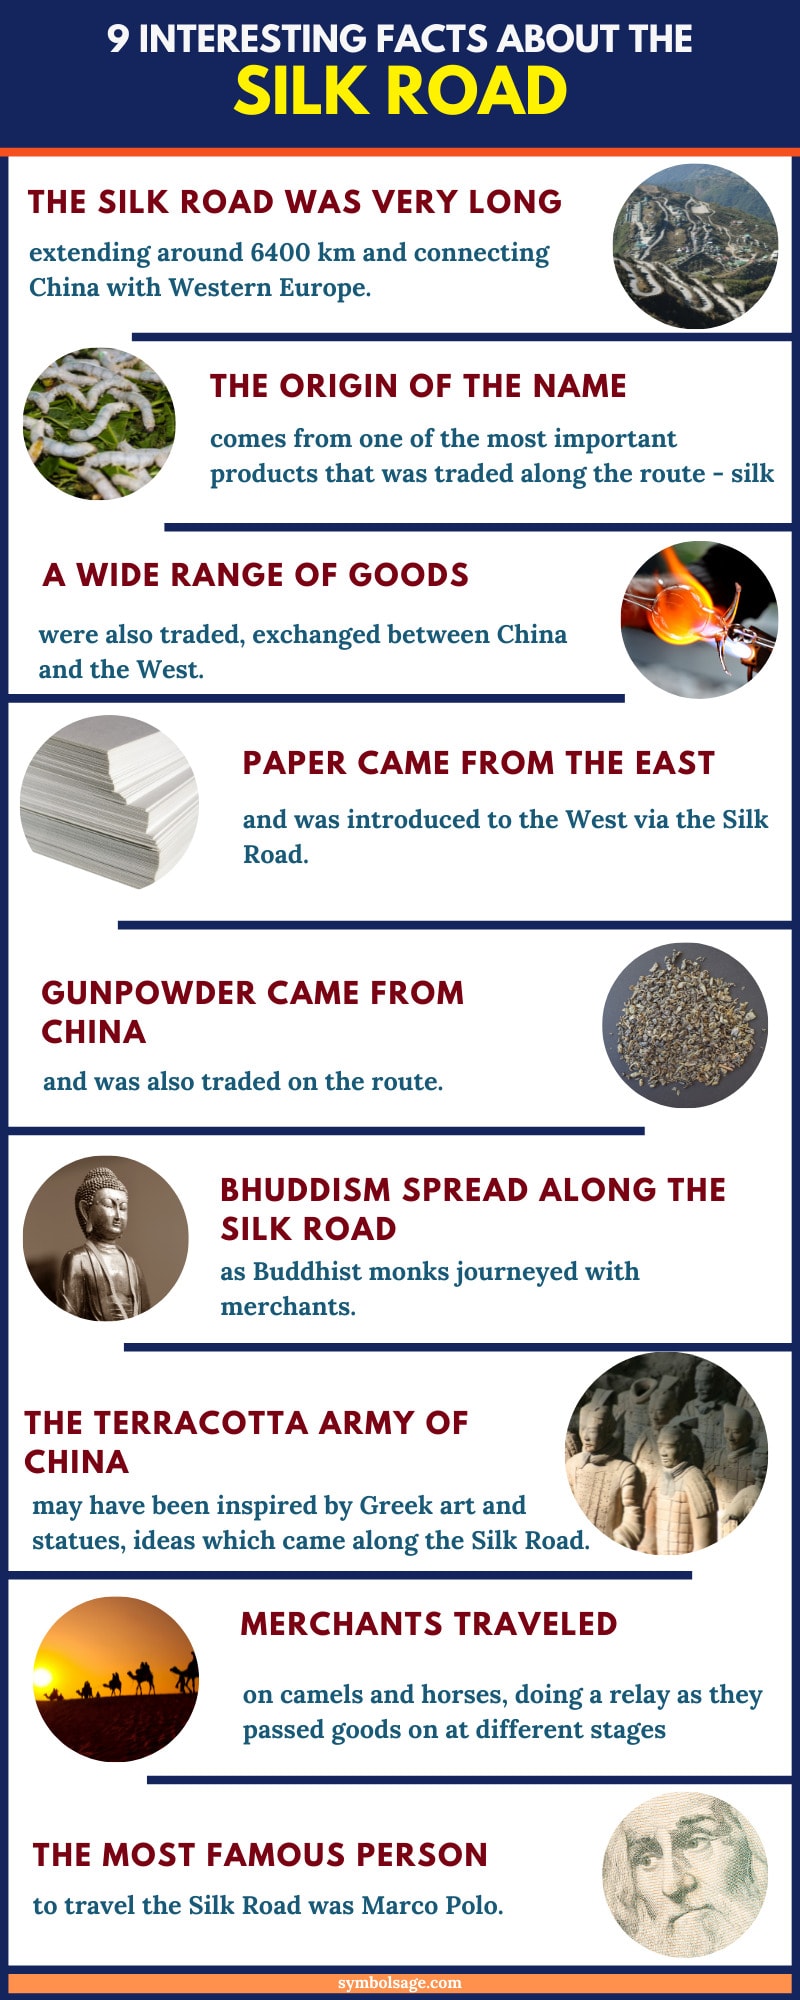 Silk road facts